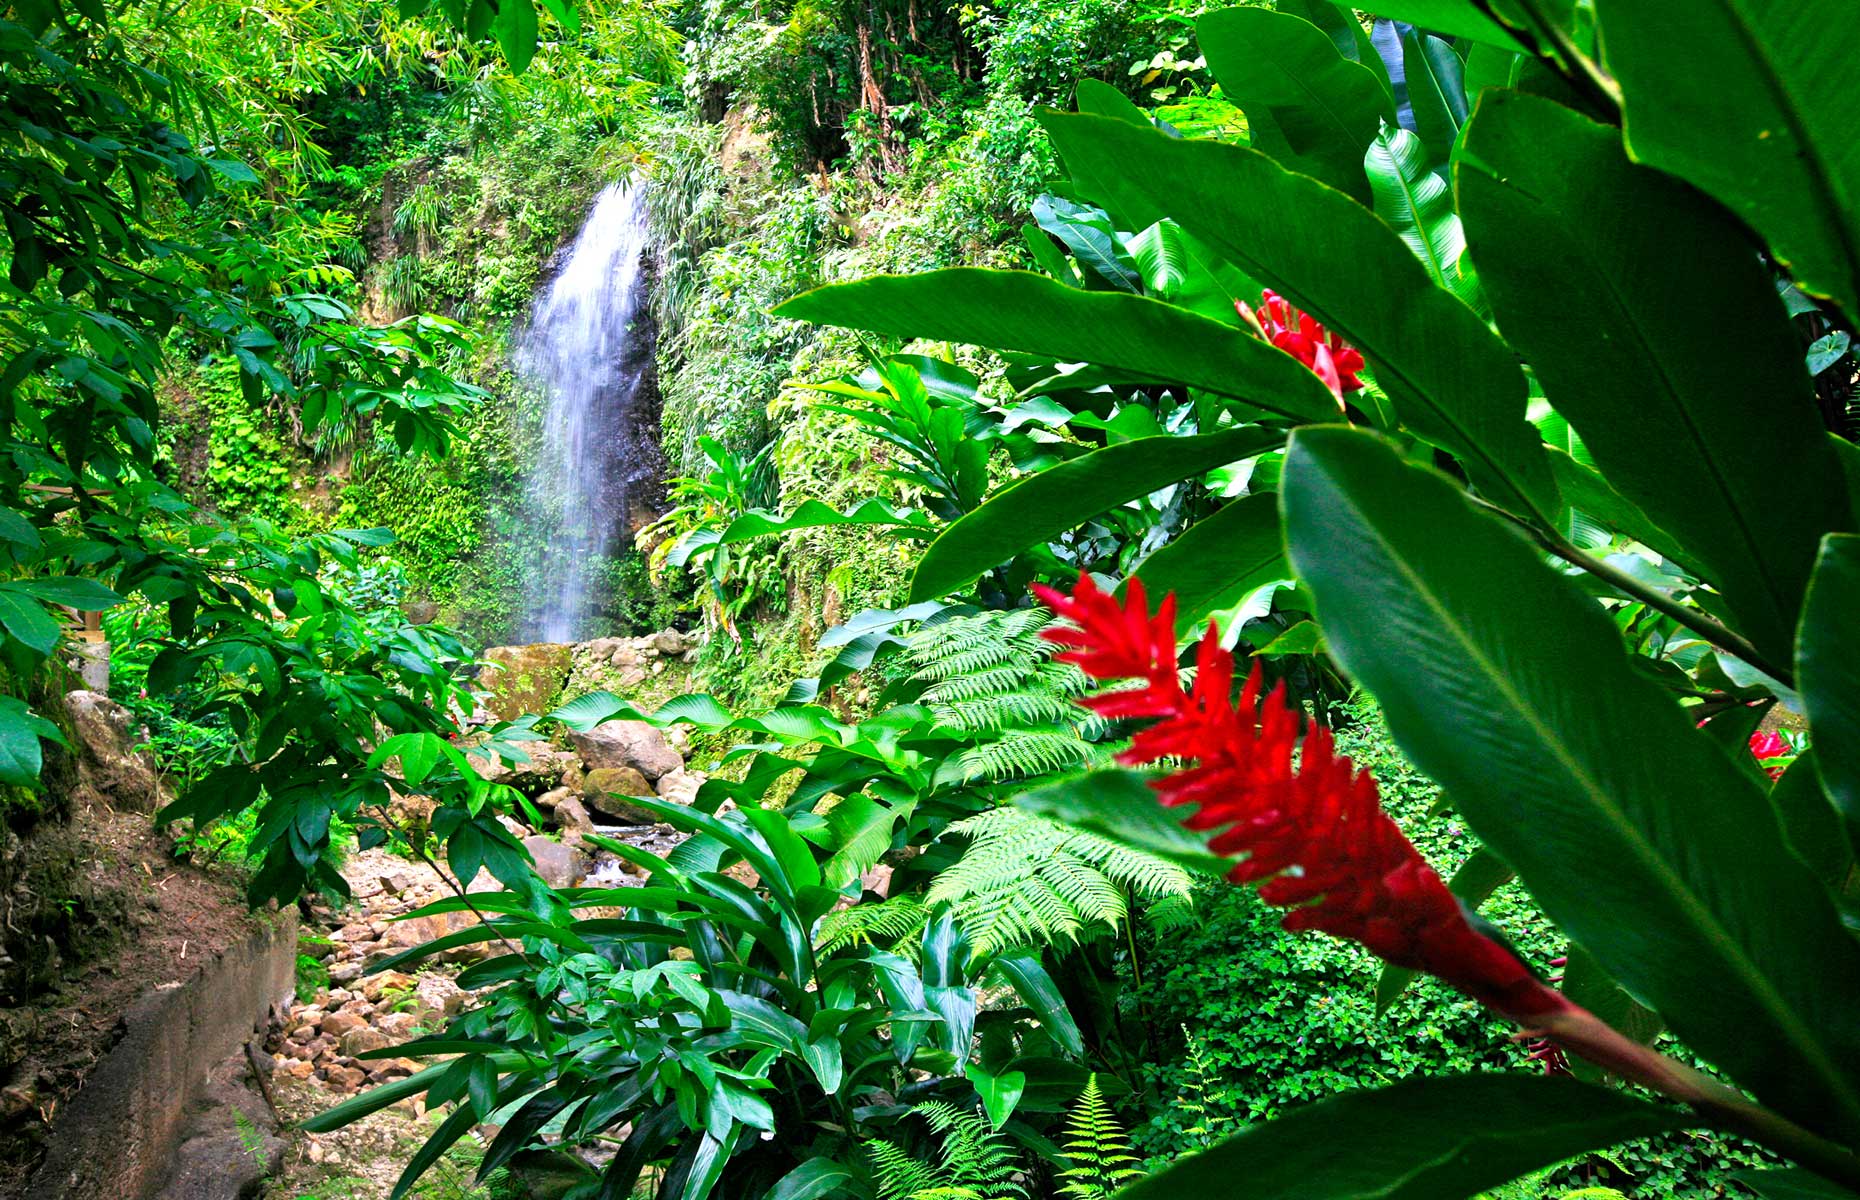 Waterfall and flowers on the island of Saint Lucia in the Caribbean (Image: Courtesy of the Saint Lucia Tourism Authority)